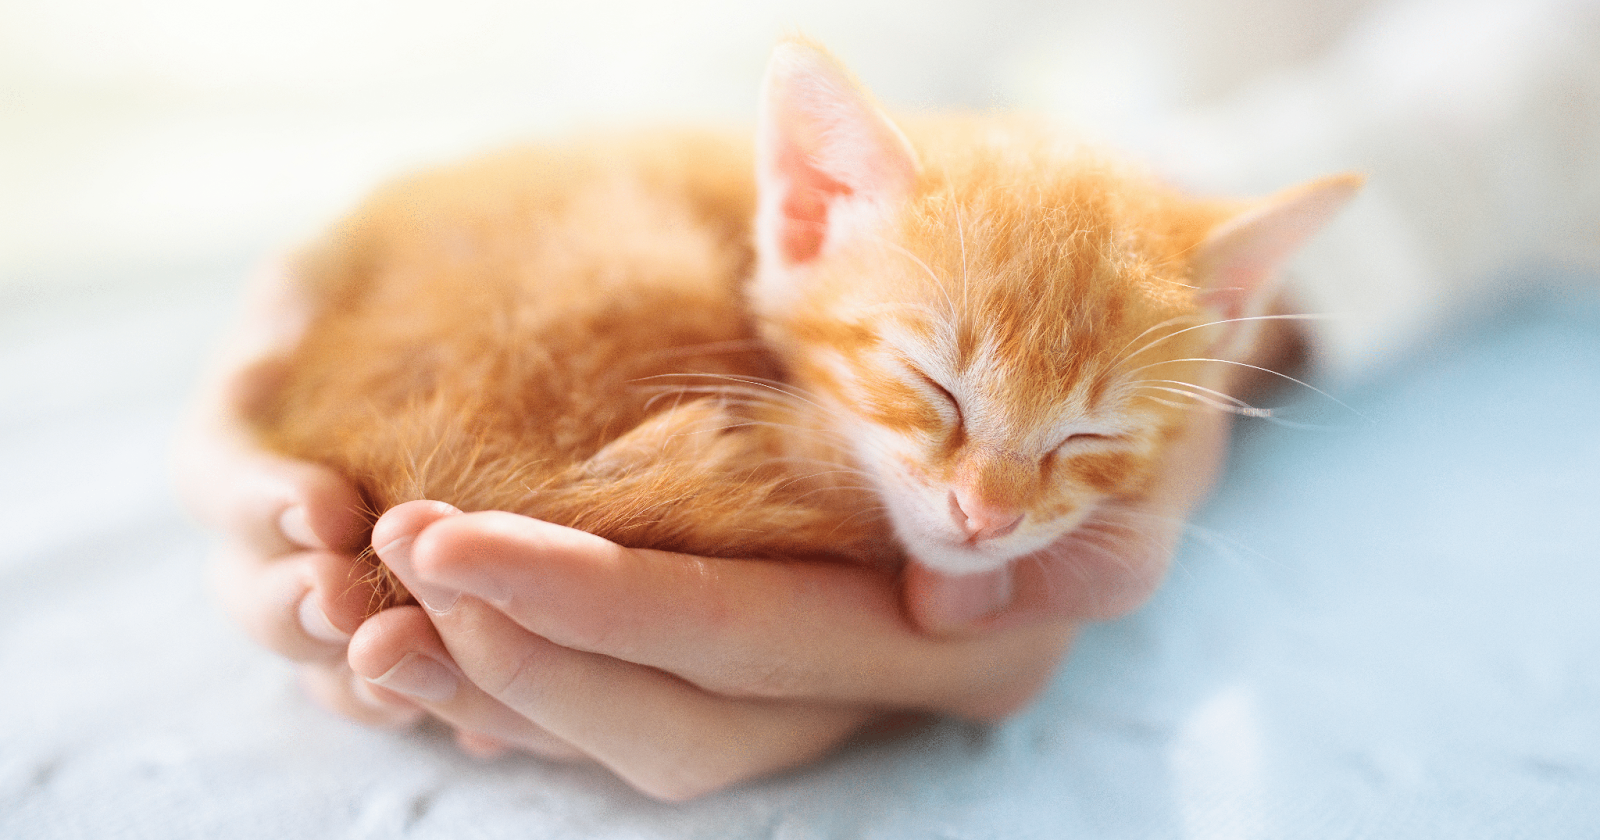 tiny ginger kitten asleep in palm of hand